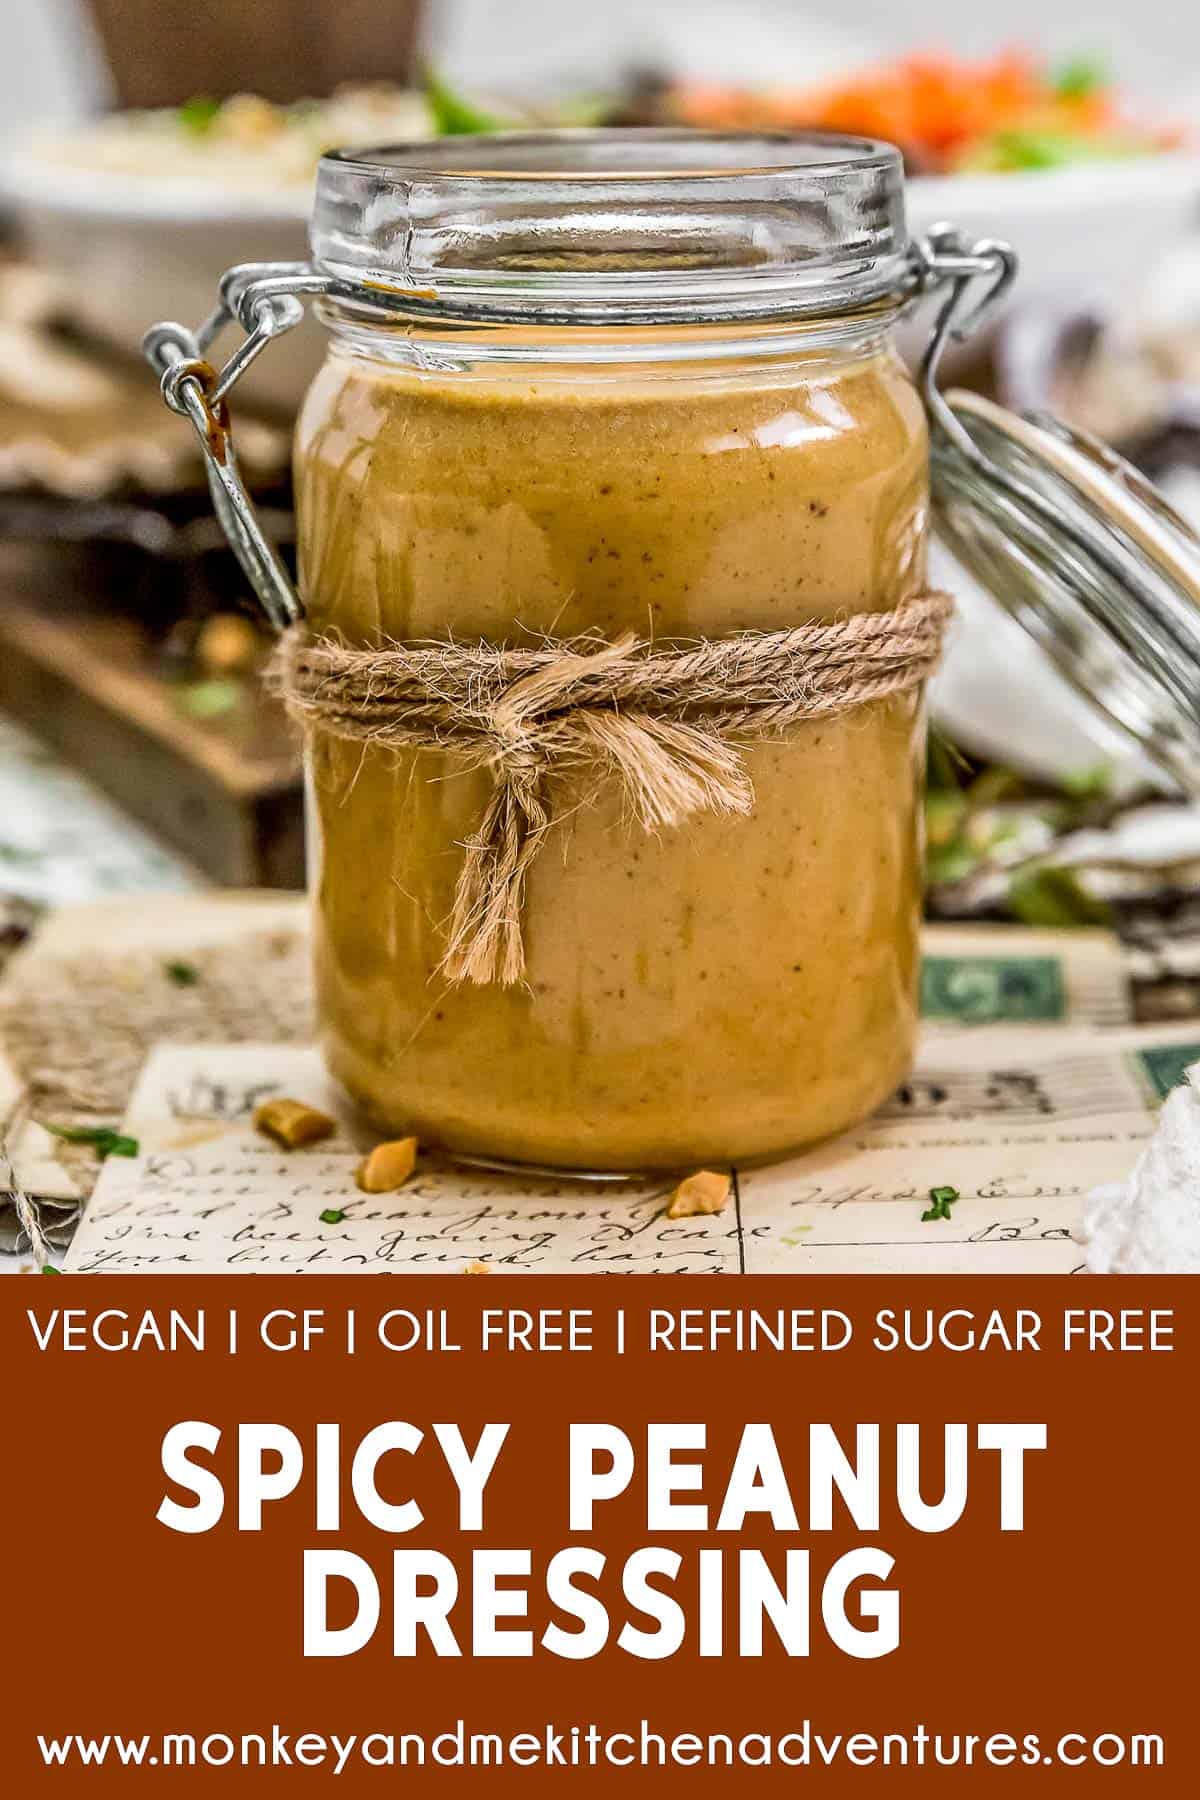 Spicy Peanut Dressing with text description